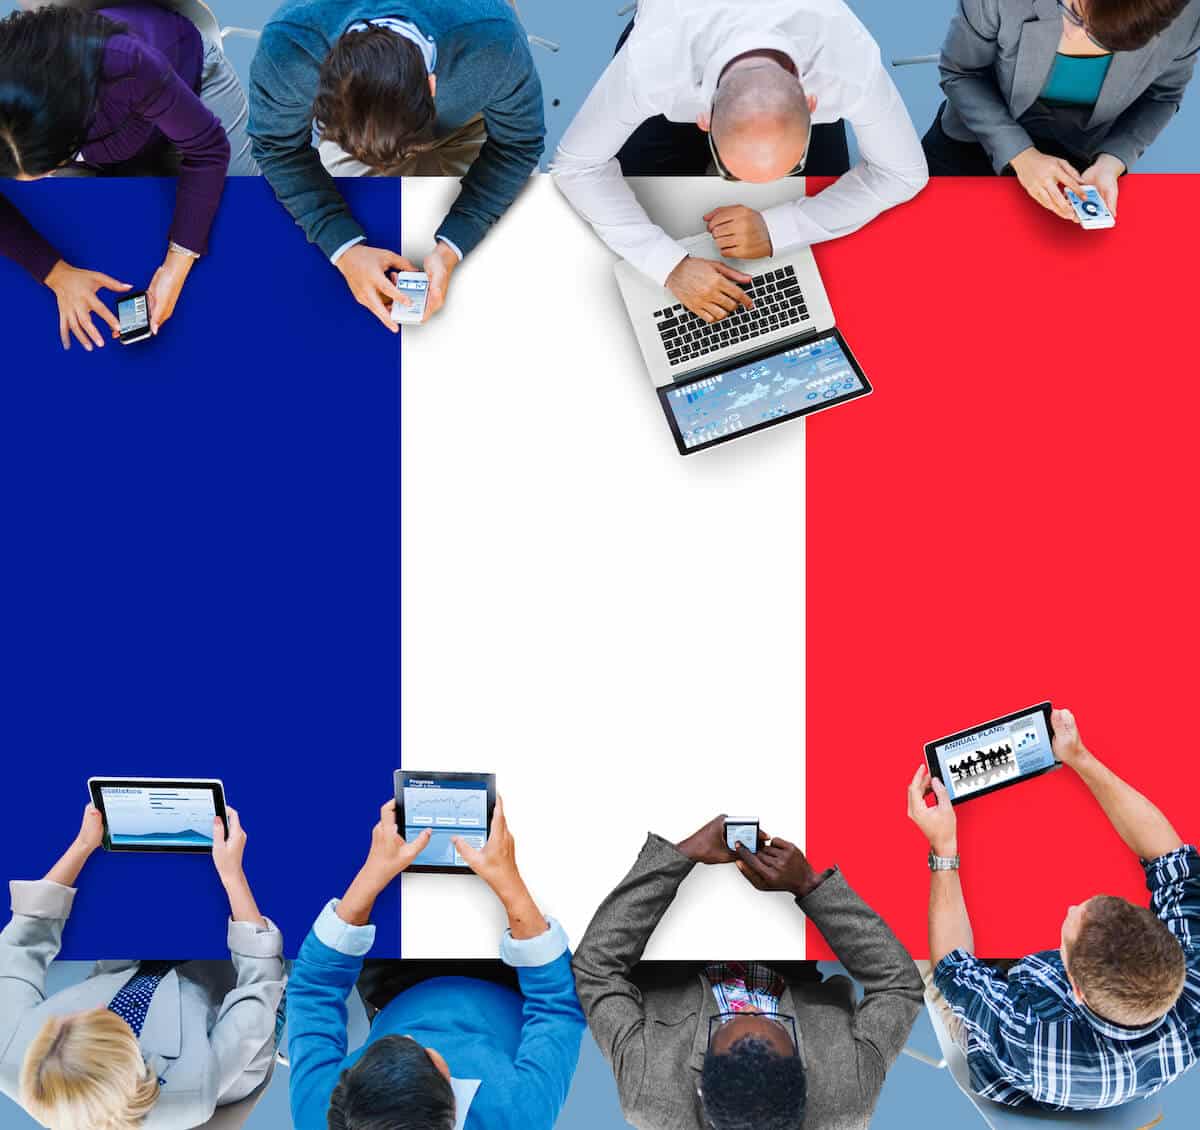 French working visas: group of people working at a table that's painted like the French flag